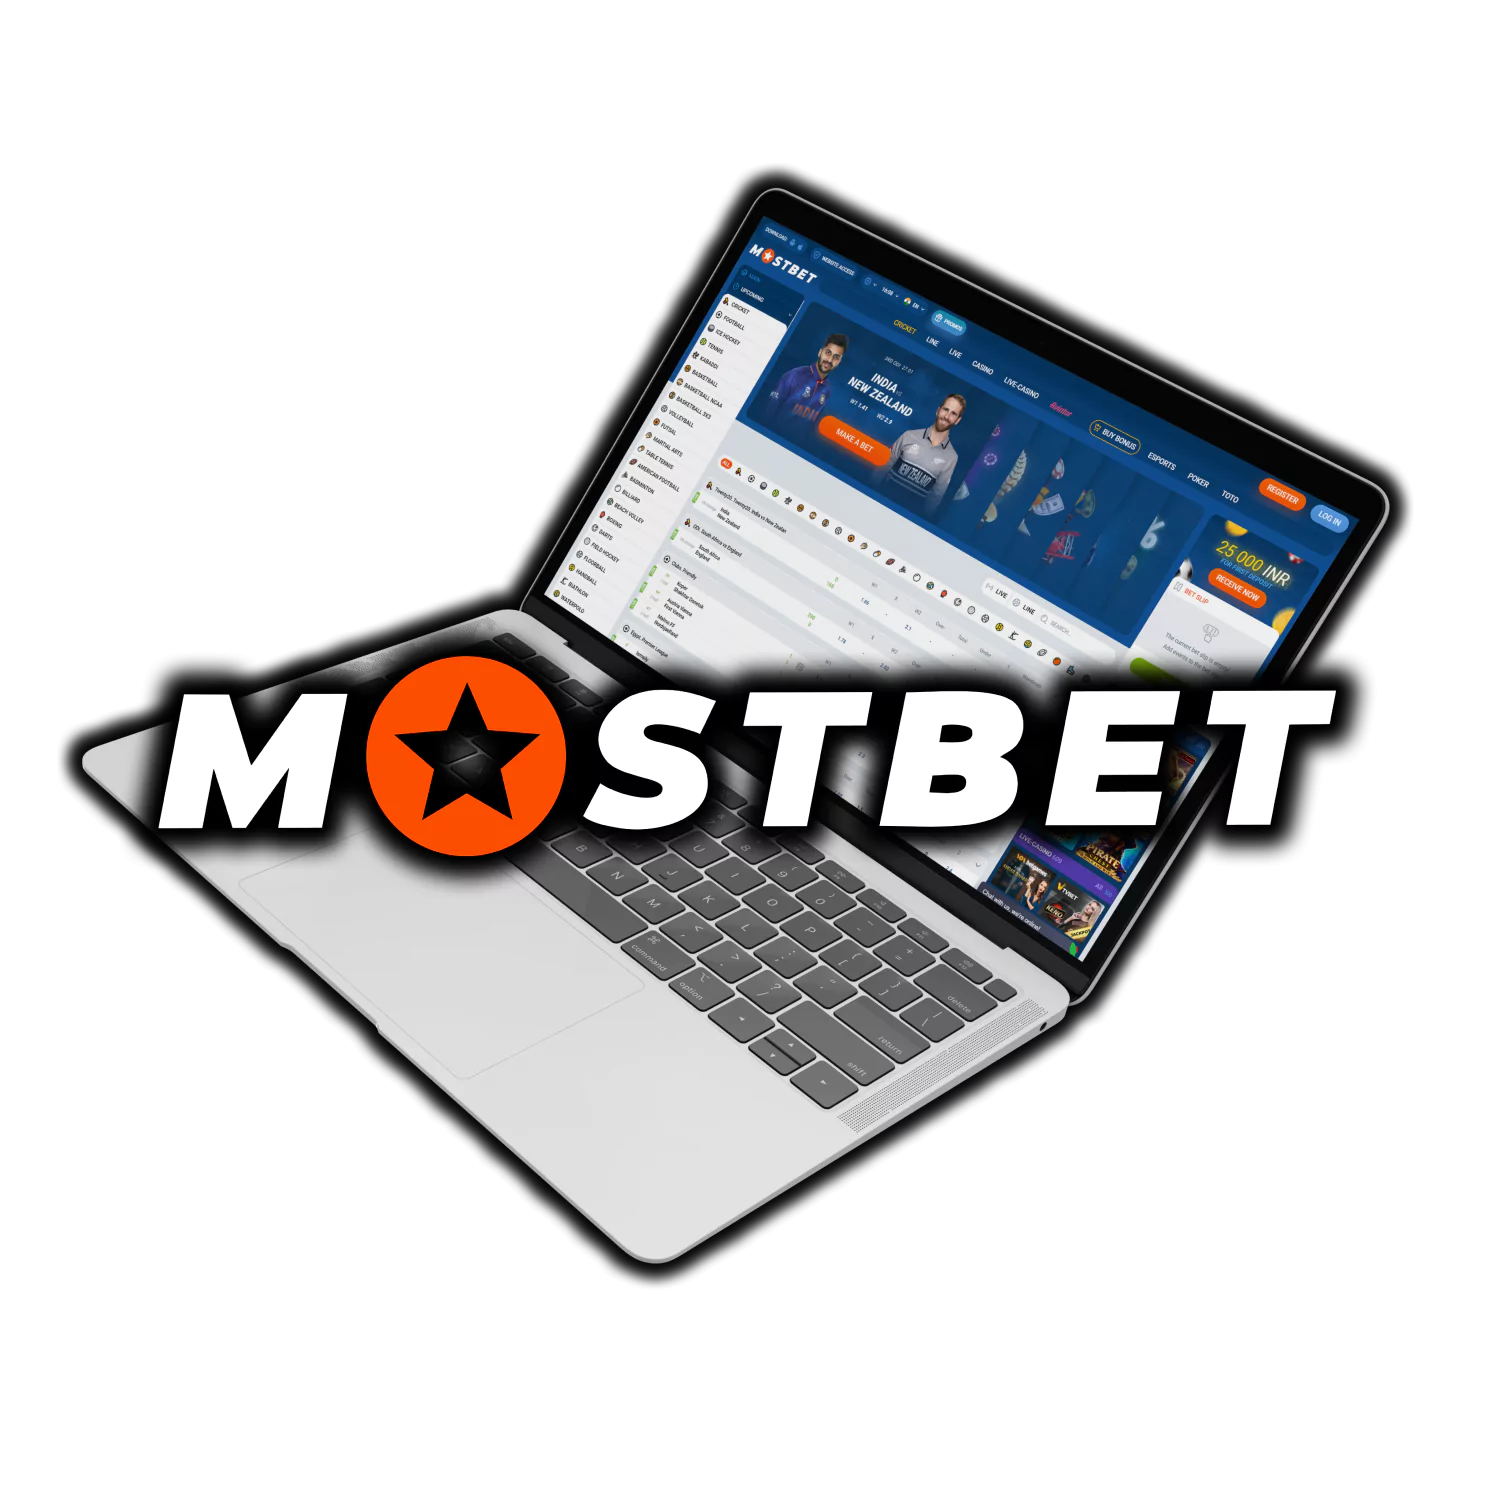 Mostbet betting company in the Czech Republic: Keep It Simple And Stupid